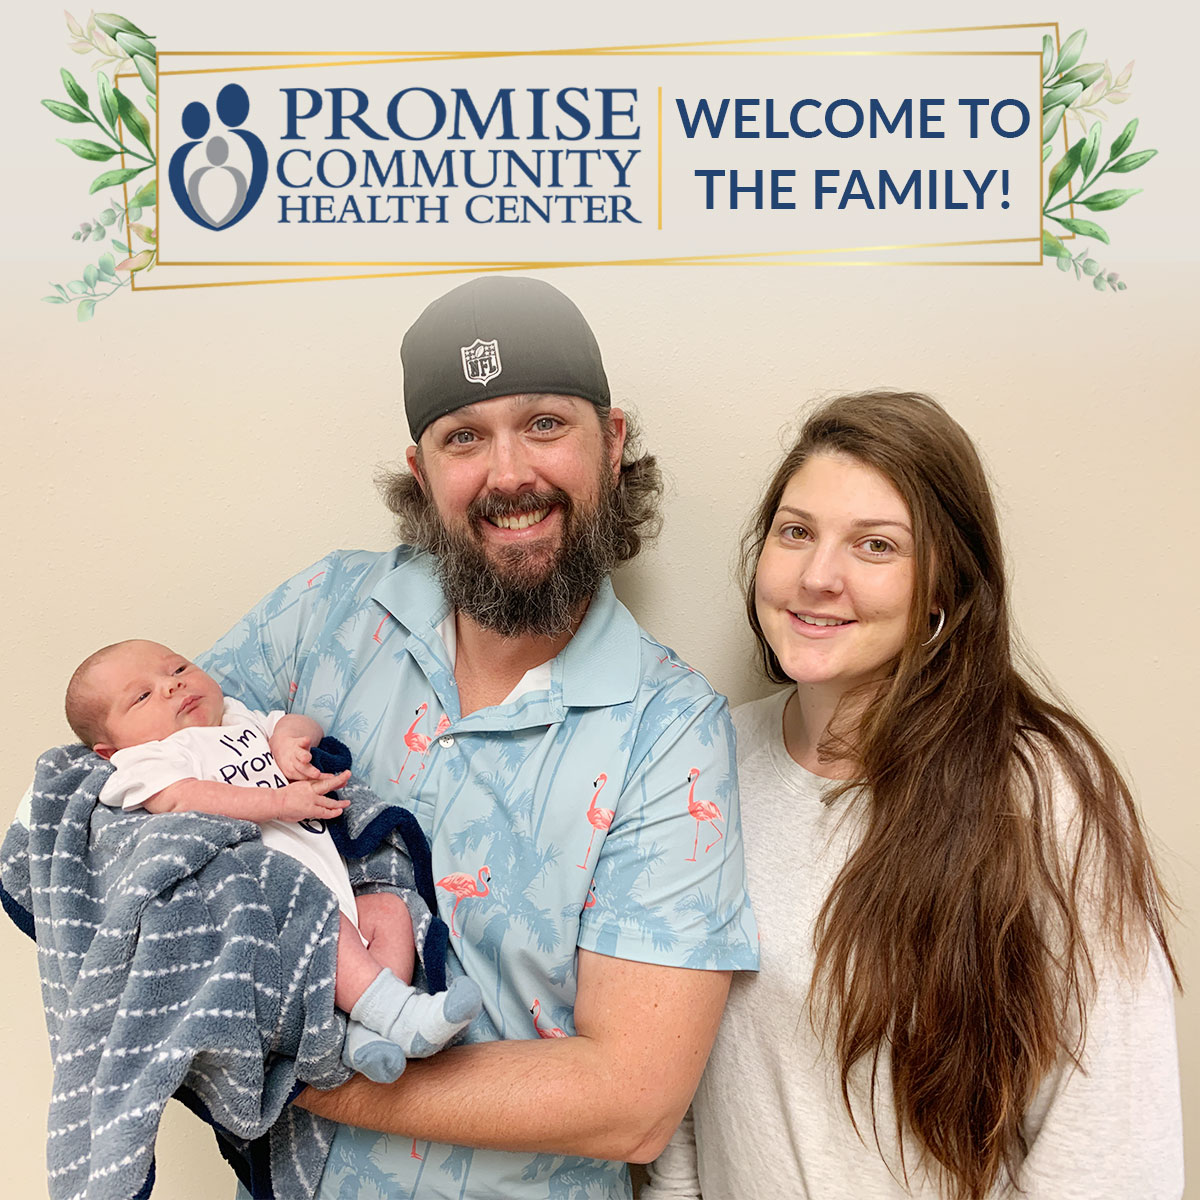 Home birth in Sioux Falls, South Dakota |Promise Community Health Center in Sioux Center, Iowa | Home births in northwest Iowa, Home births in southeast South Dakota, Home births in southwest Minnesota | Home births in Sioux Falls South Dakota, Home births in Beresford South Dakota, Home births in Sioux City IA, Home births in LeMars IA, Home births in Worthington MN, Home births in Iowa, Home births in South Dakota, Home births in Minnesota